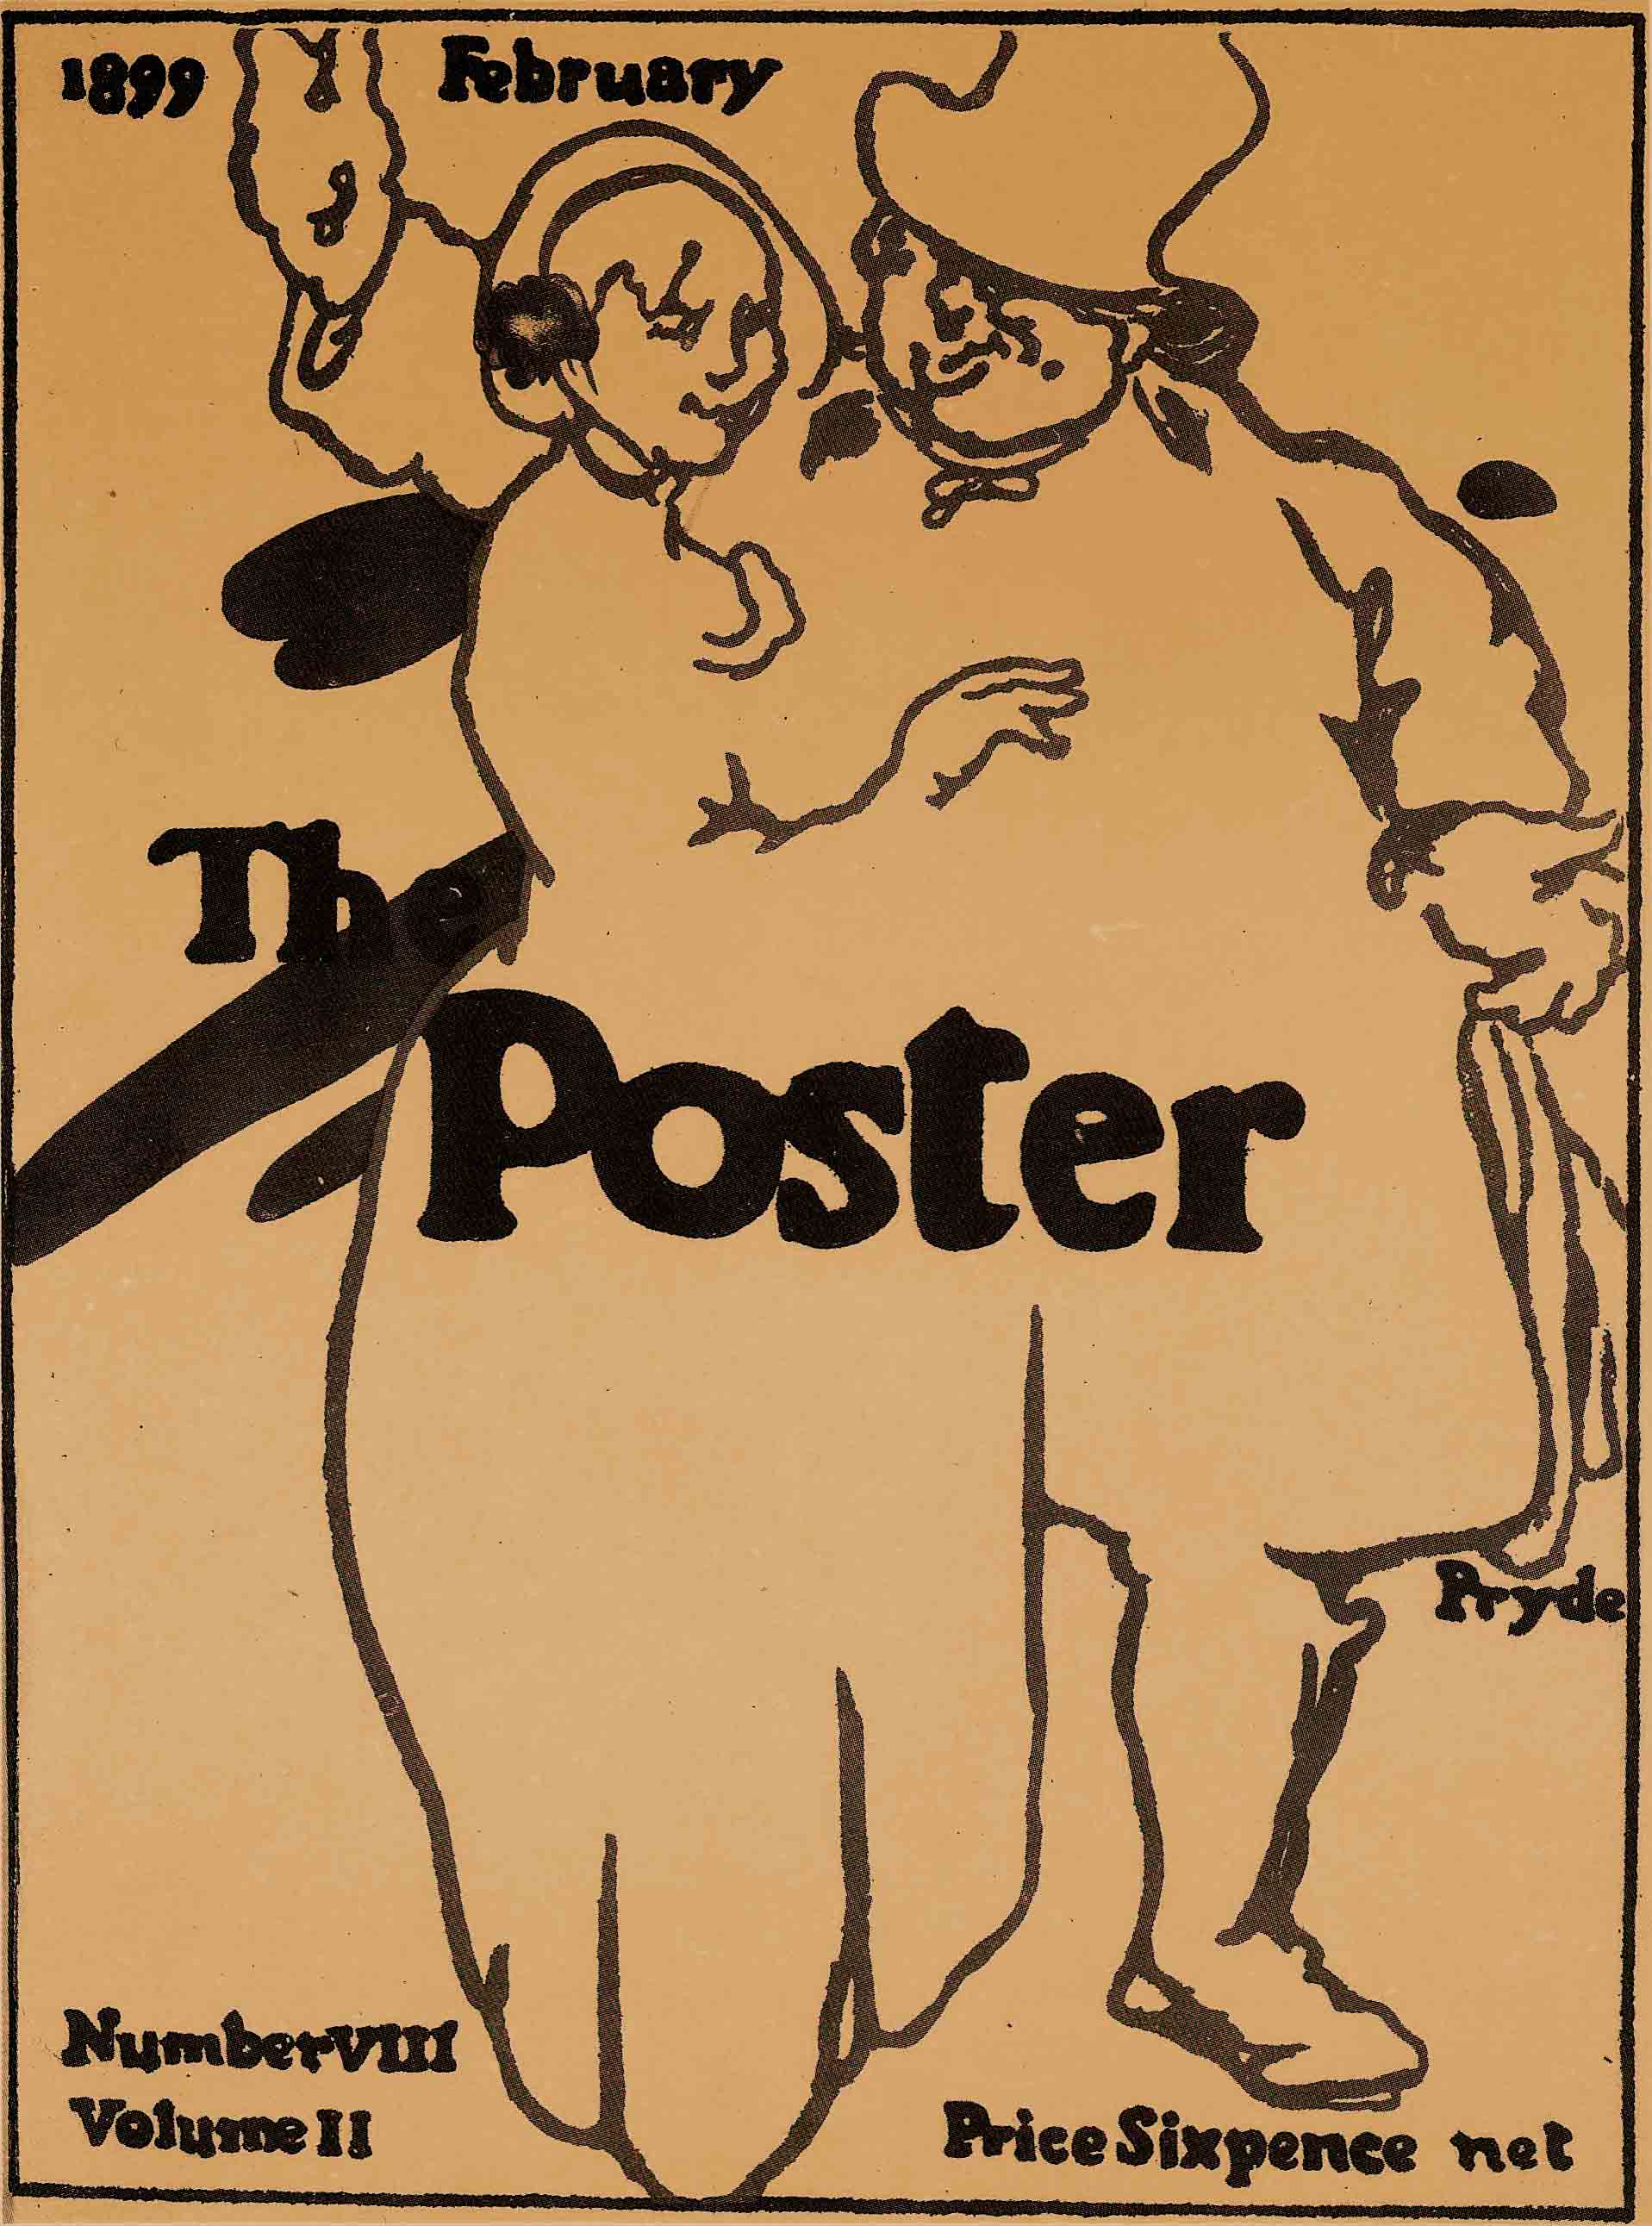 File:James Pryde, cover for The Poster, February 1899.jpg ...